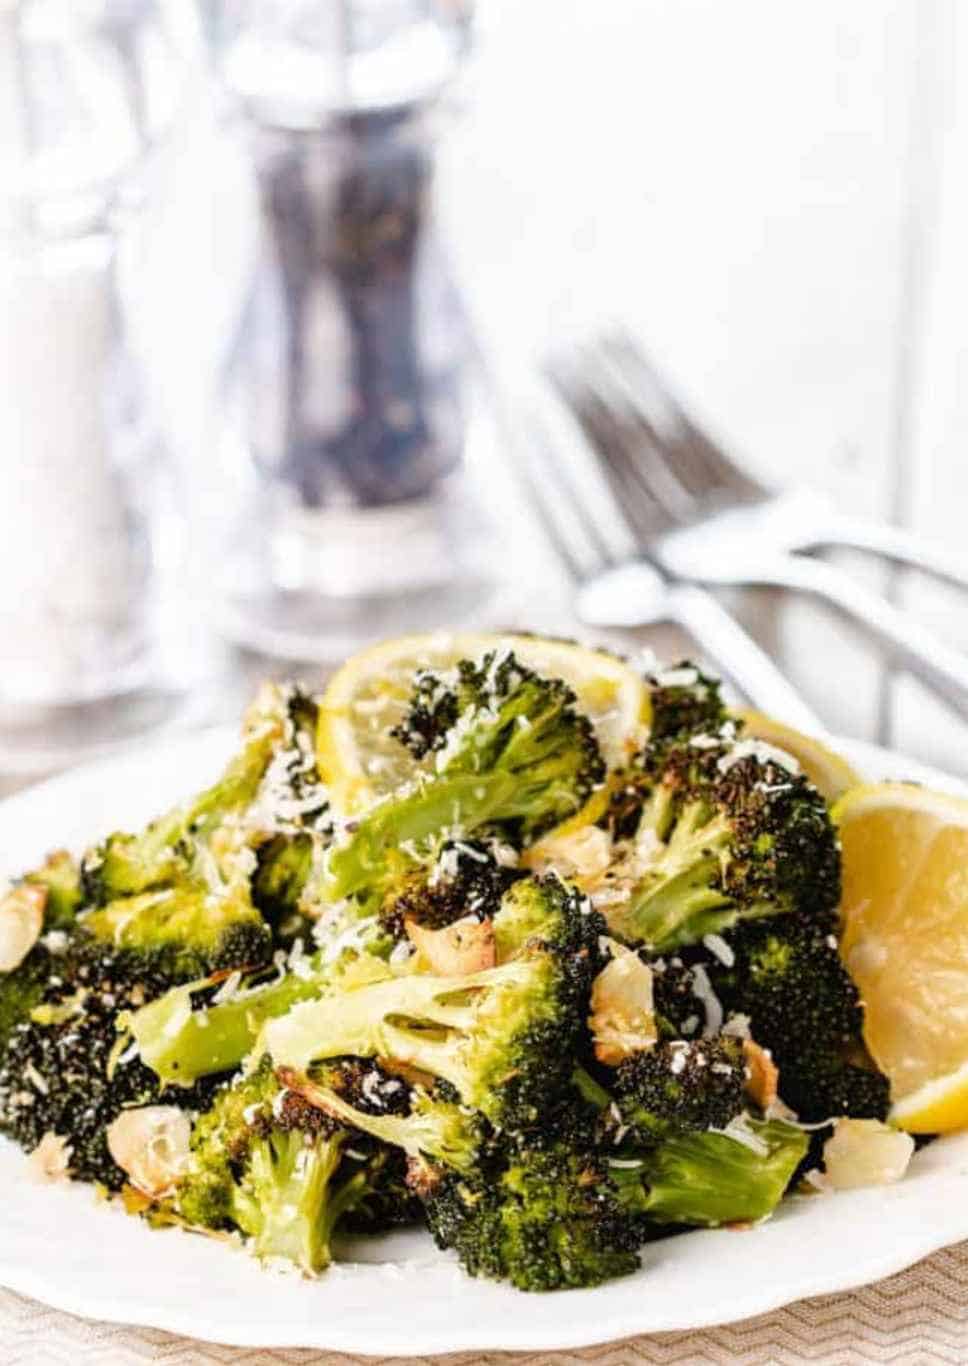 Seriously, The Best Broccoli of Your Life